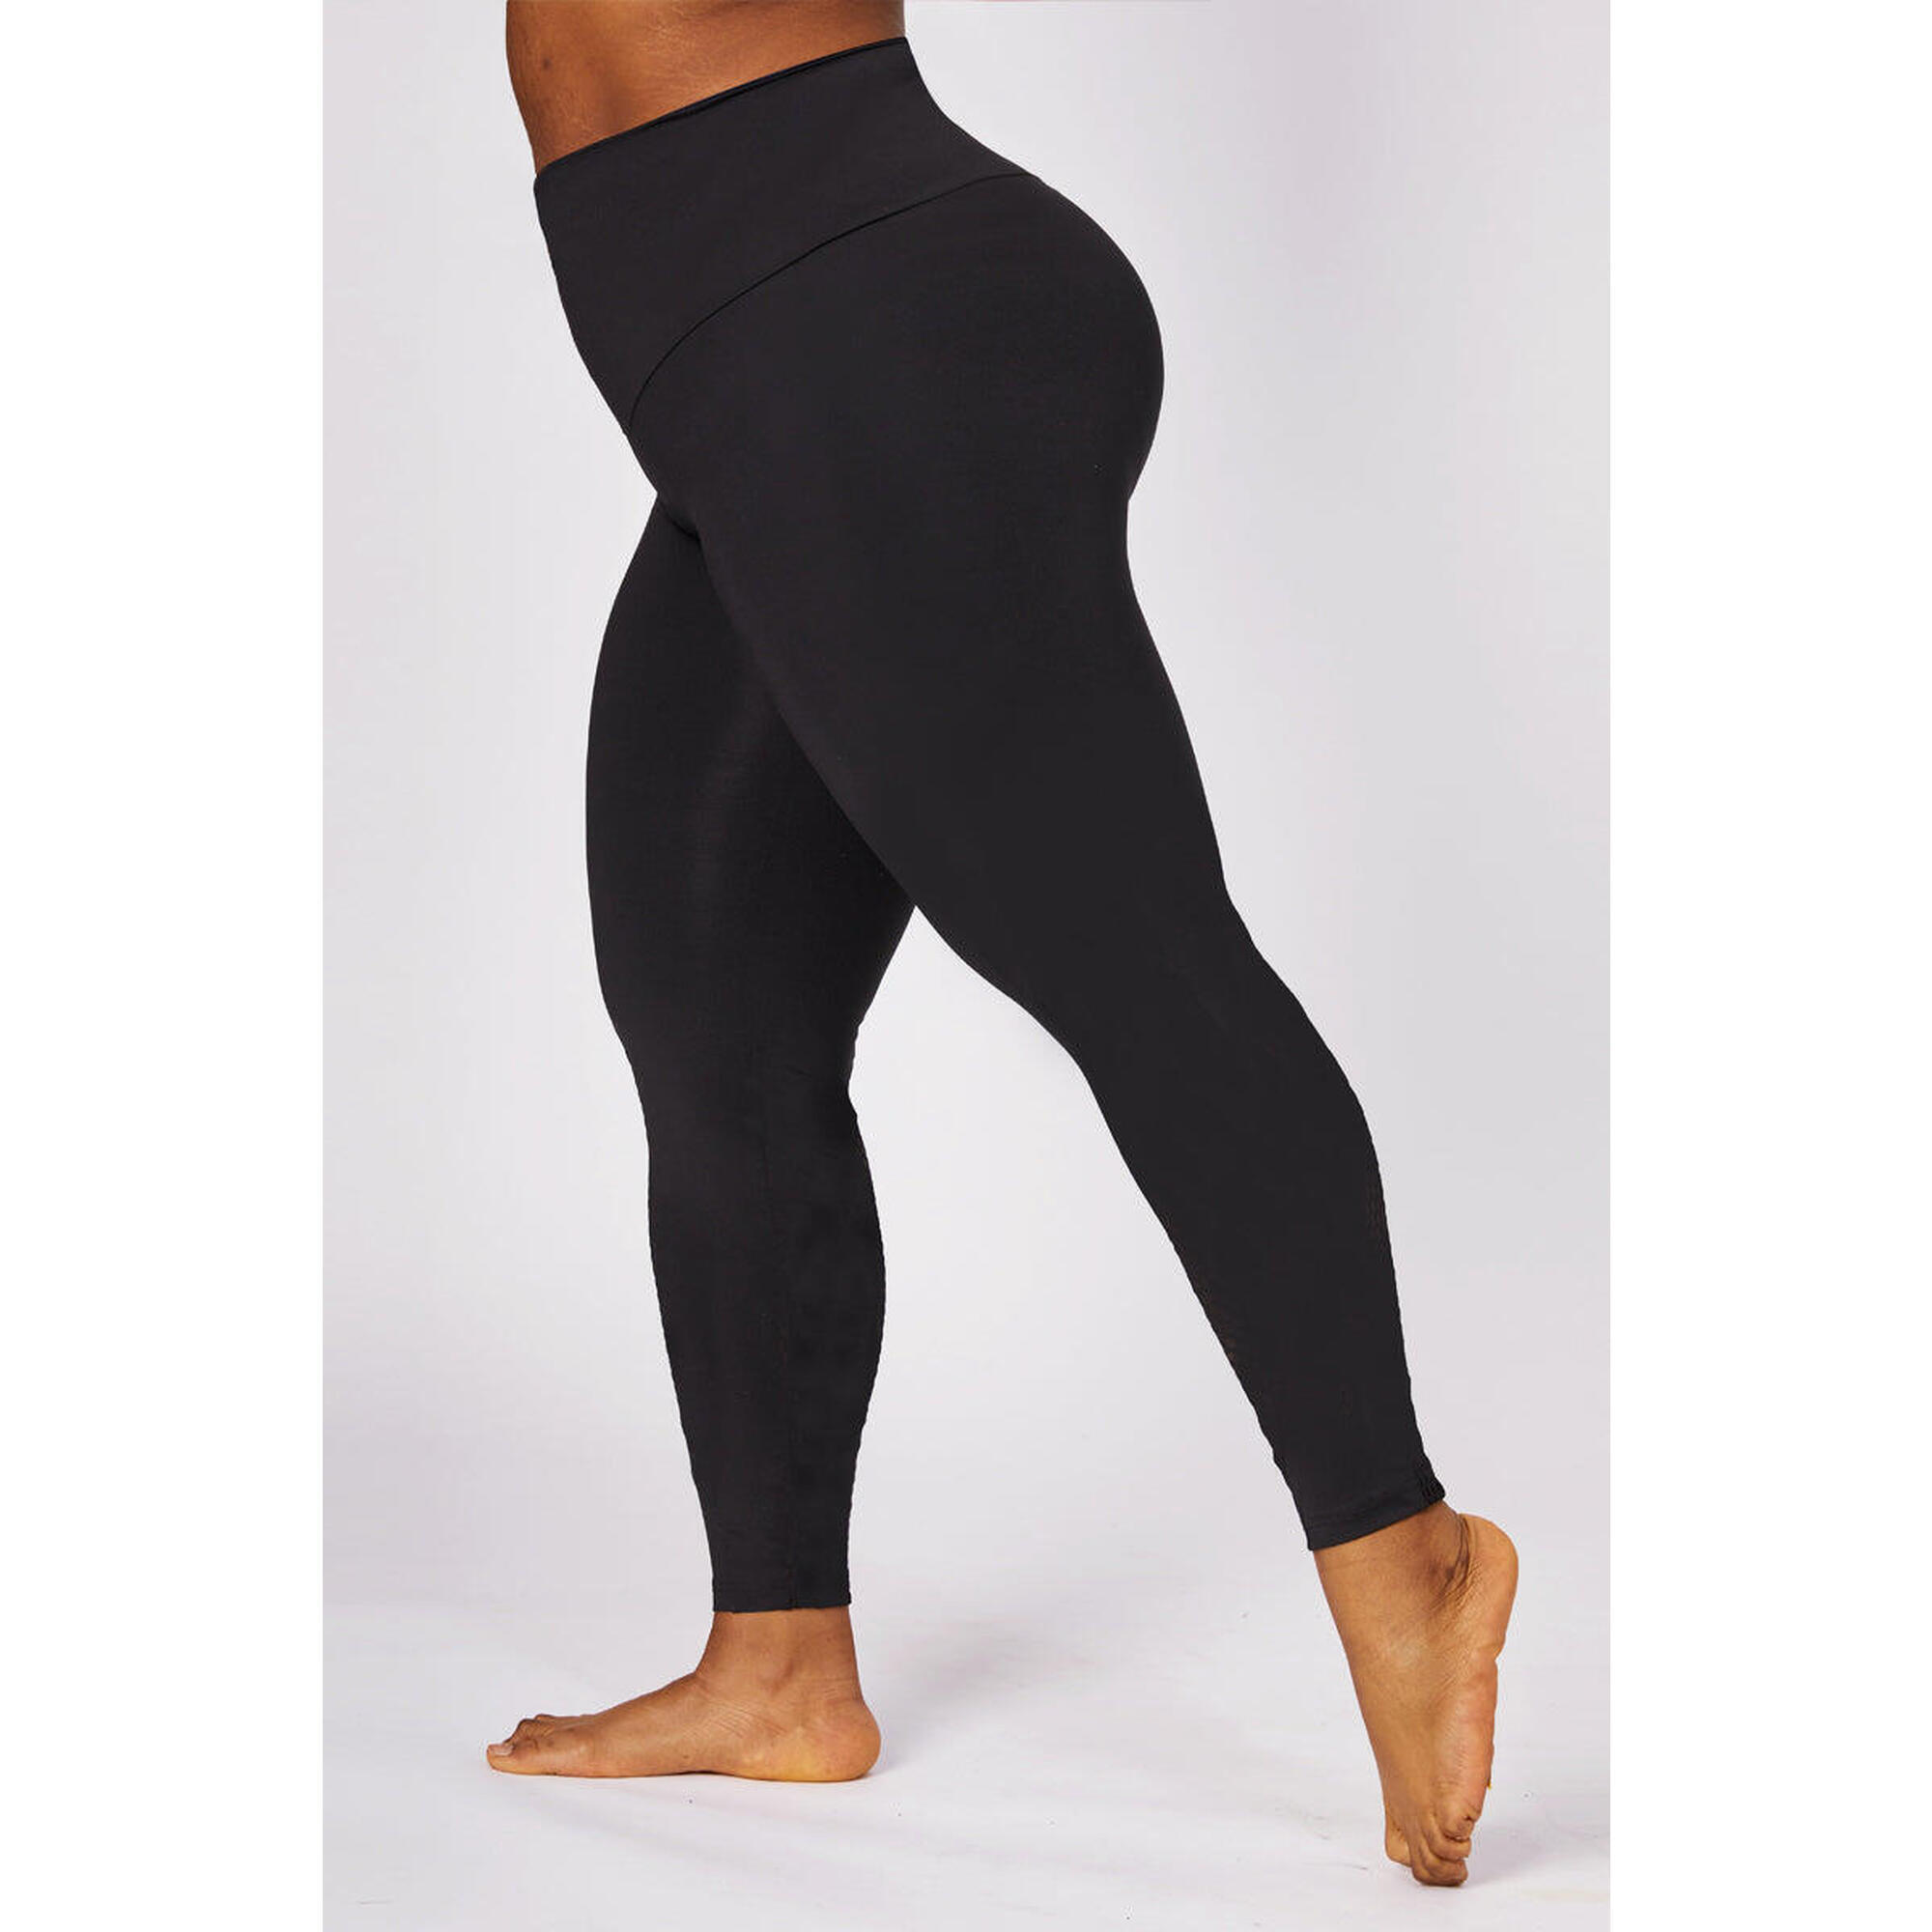 Extra Strong Compression Curve Leggings with Waisted Tummy Control Black 1/6